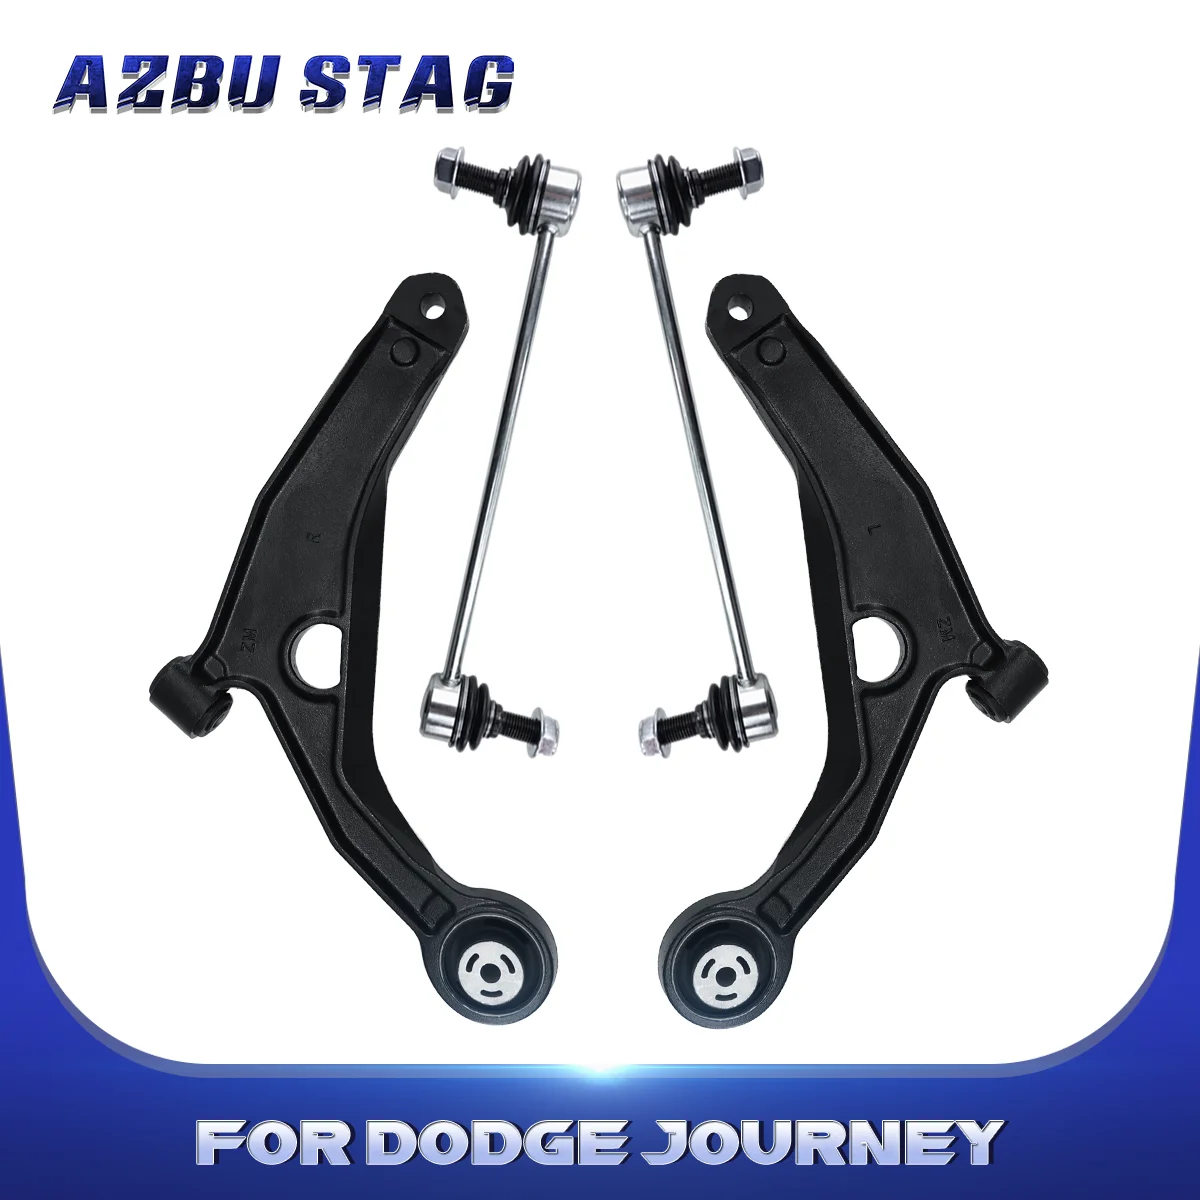 

AzbuStag 4Pcs Front Lower Left Right Control Arm Sway Bar Link Suspension for DODGE JOURNEY 2009 2010 2011 2012 2013 2014 2015